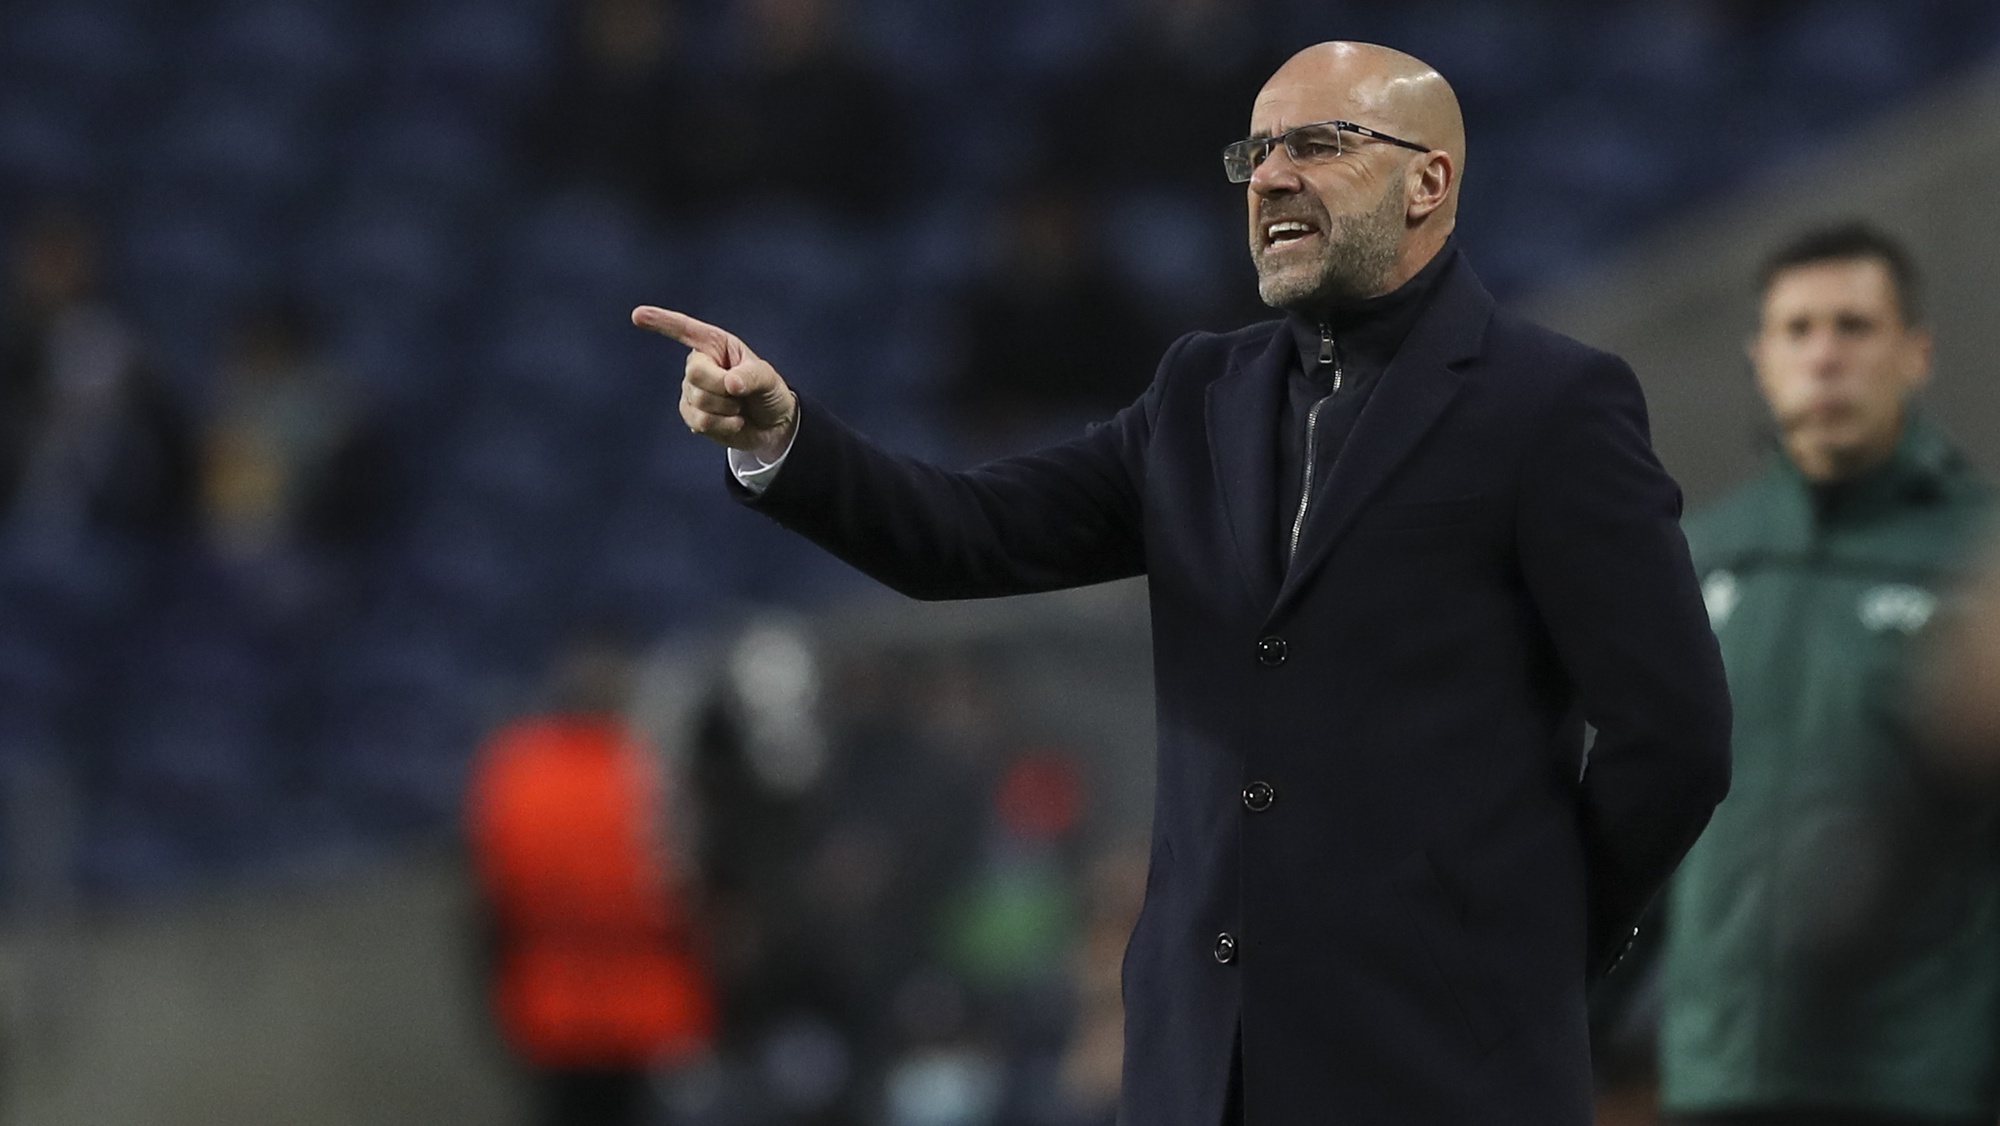 Olympique Lyon head coach Peter Bosz reacts during their UEFA Europa League round of 16 first leg soccer match with FC Porto held on Dragao stadium, Porto, Portugal, 9th March 2022. JOSE COELHO/LUSA